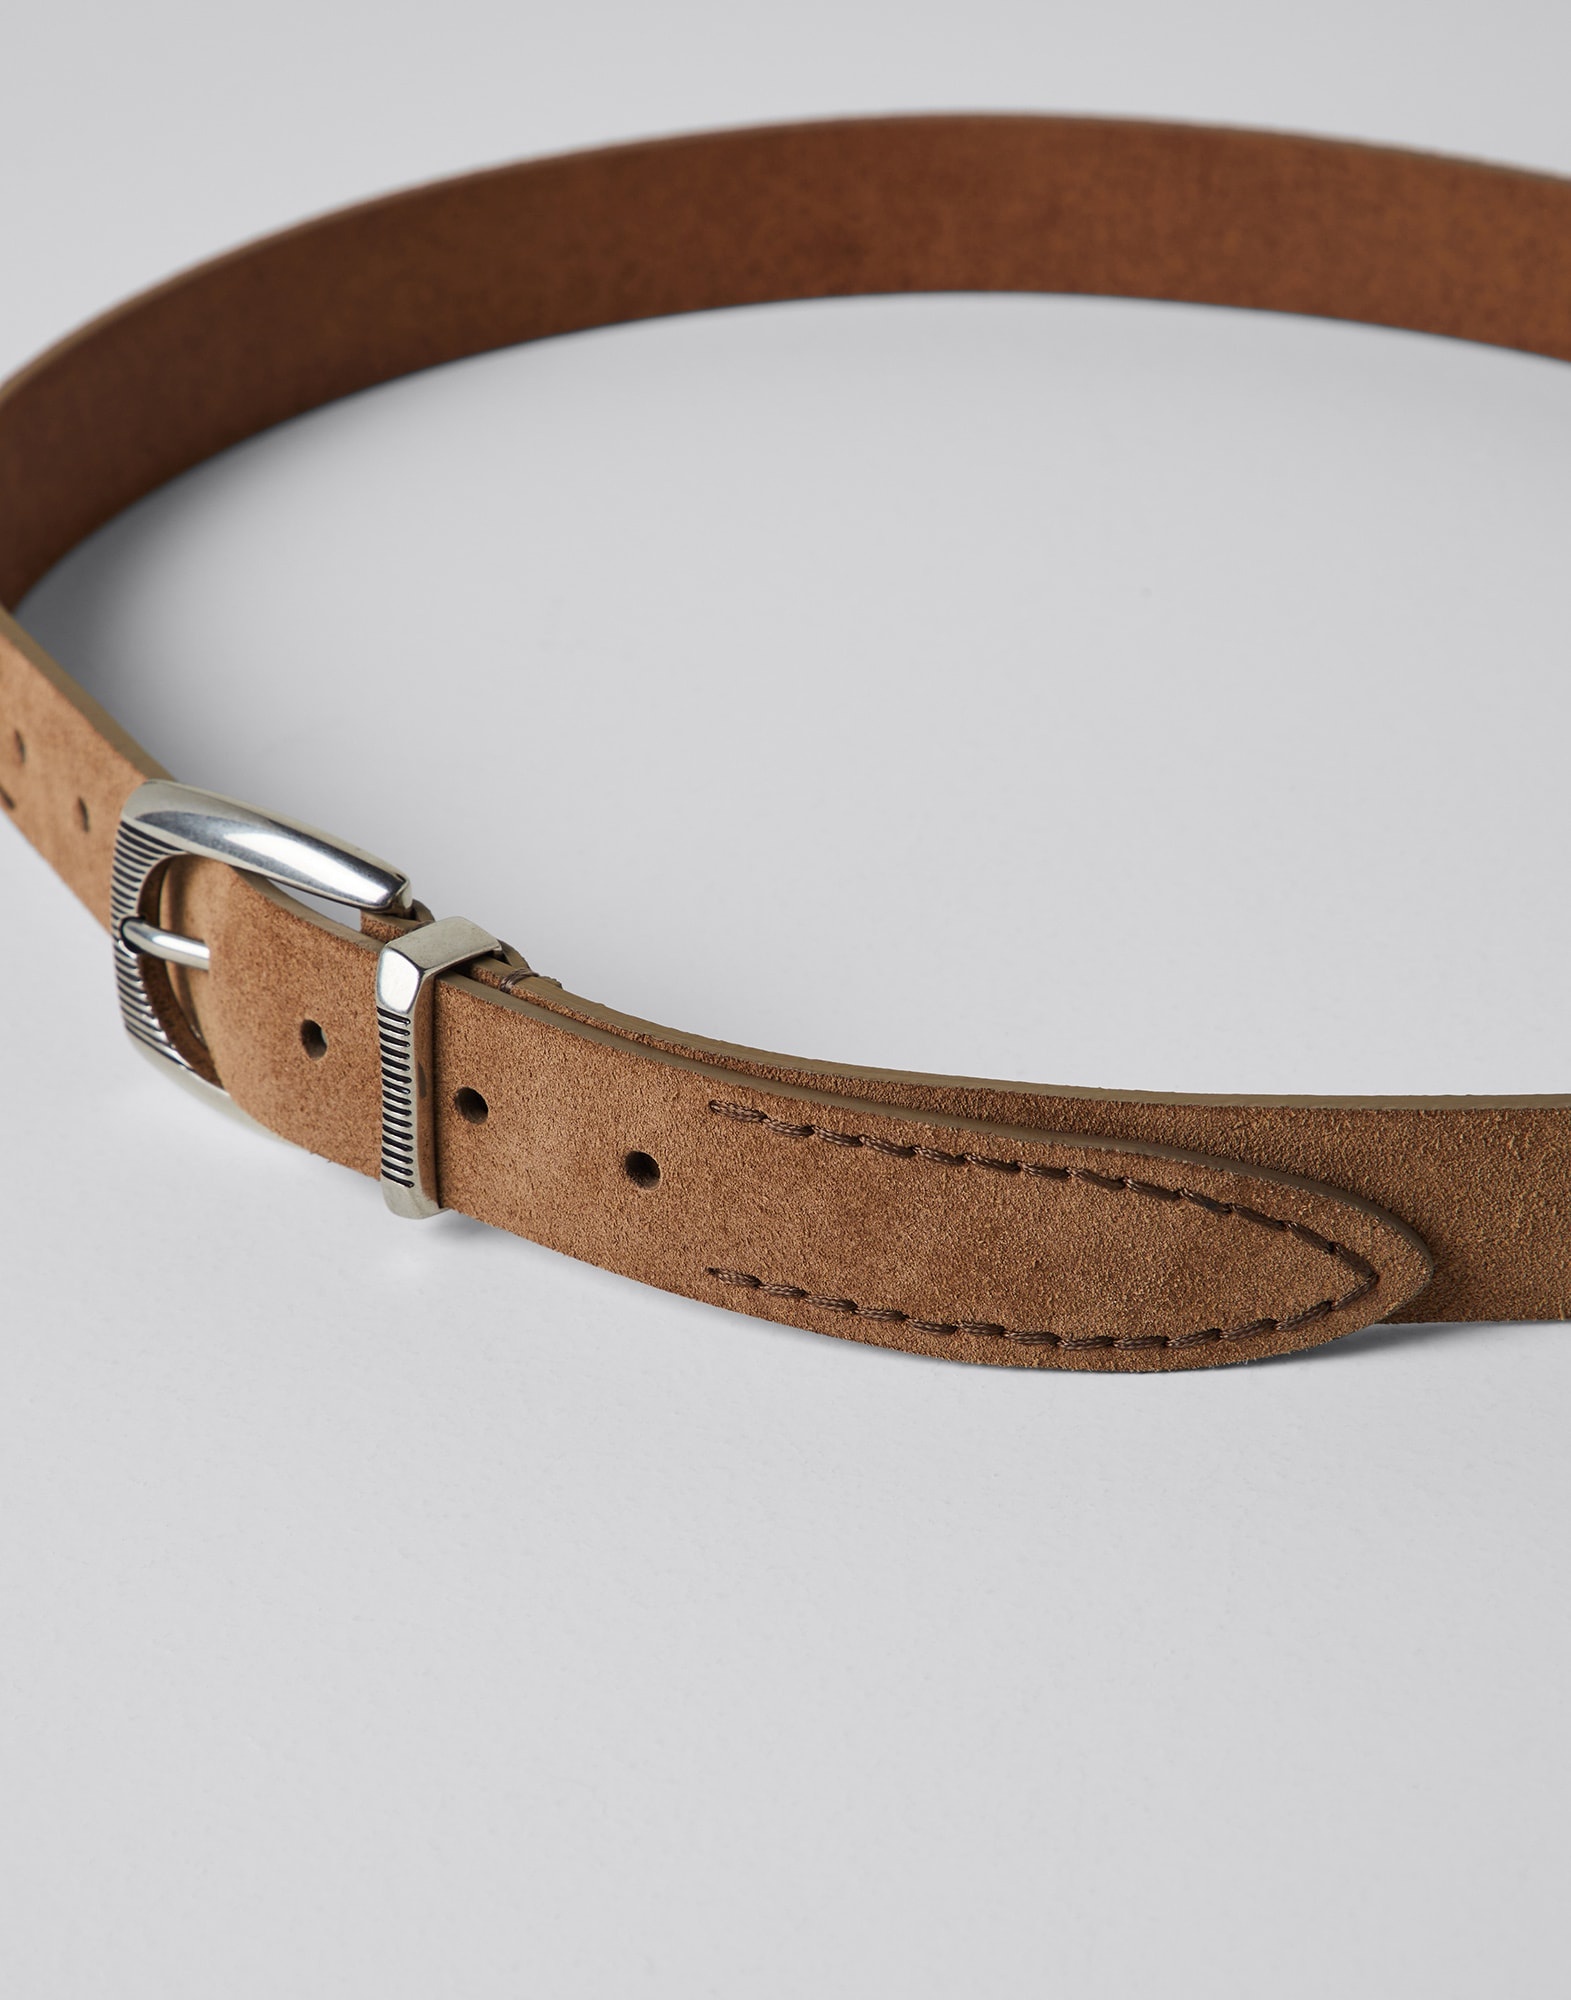 Reversed leather belt with stitching and detailed buckle - 2